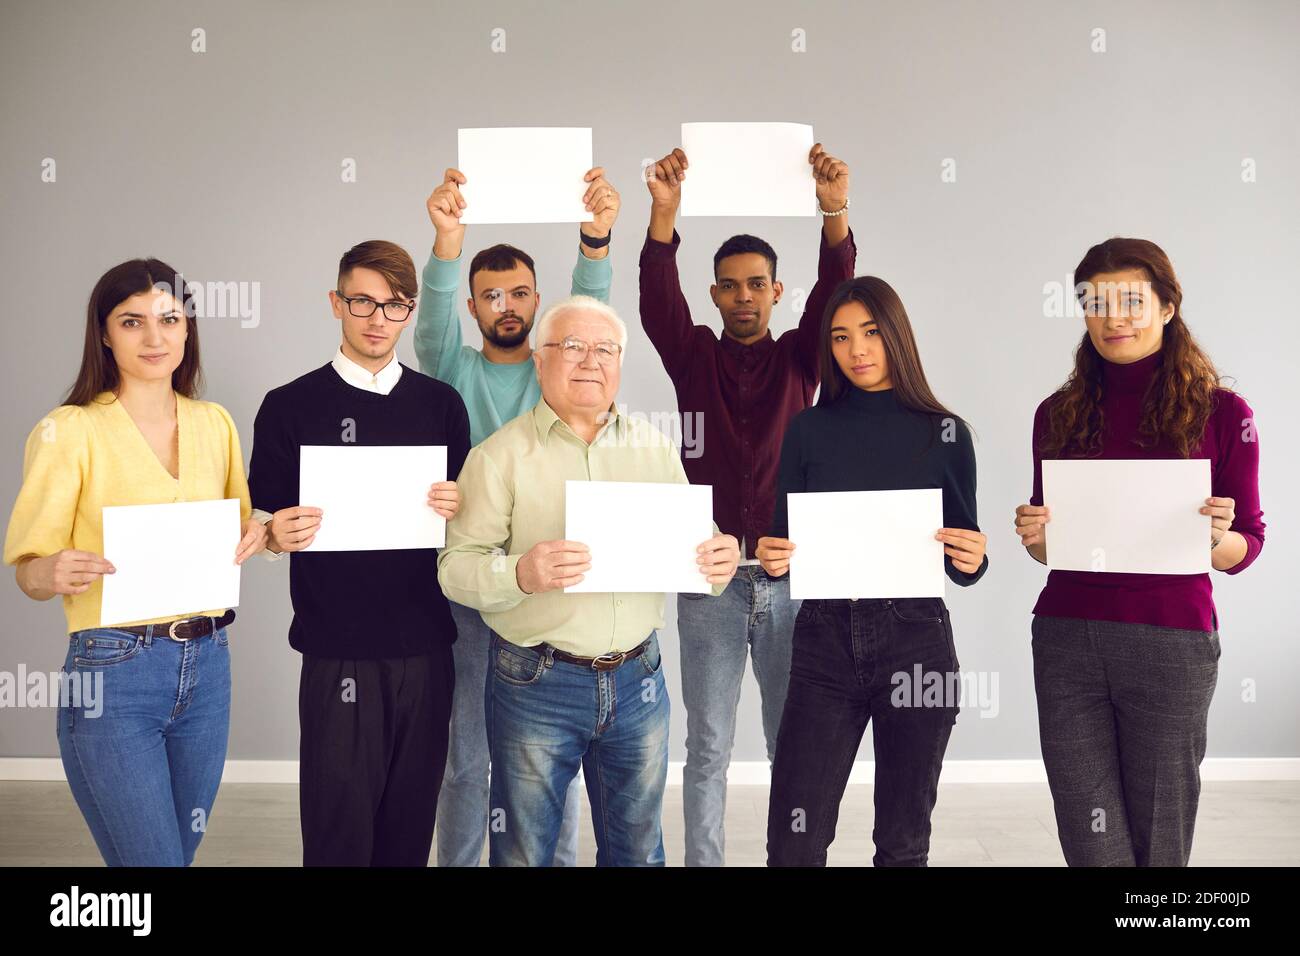 Group of different people standing together, holding white sheets of paper and looking at camera Stock Photo